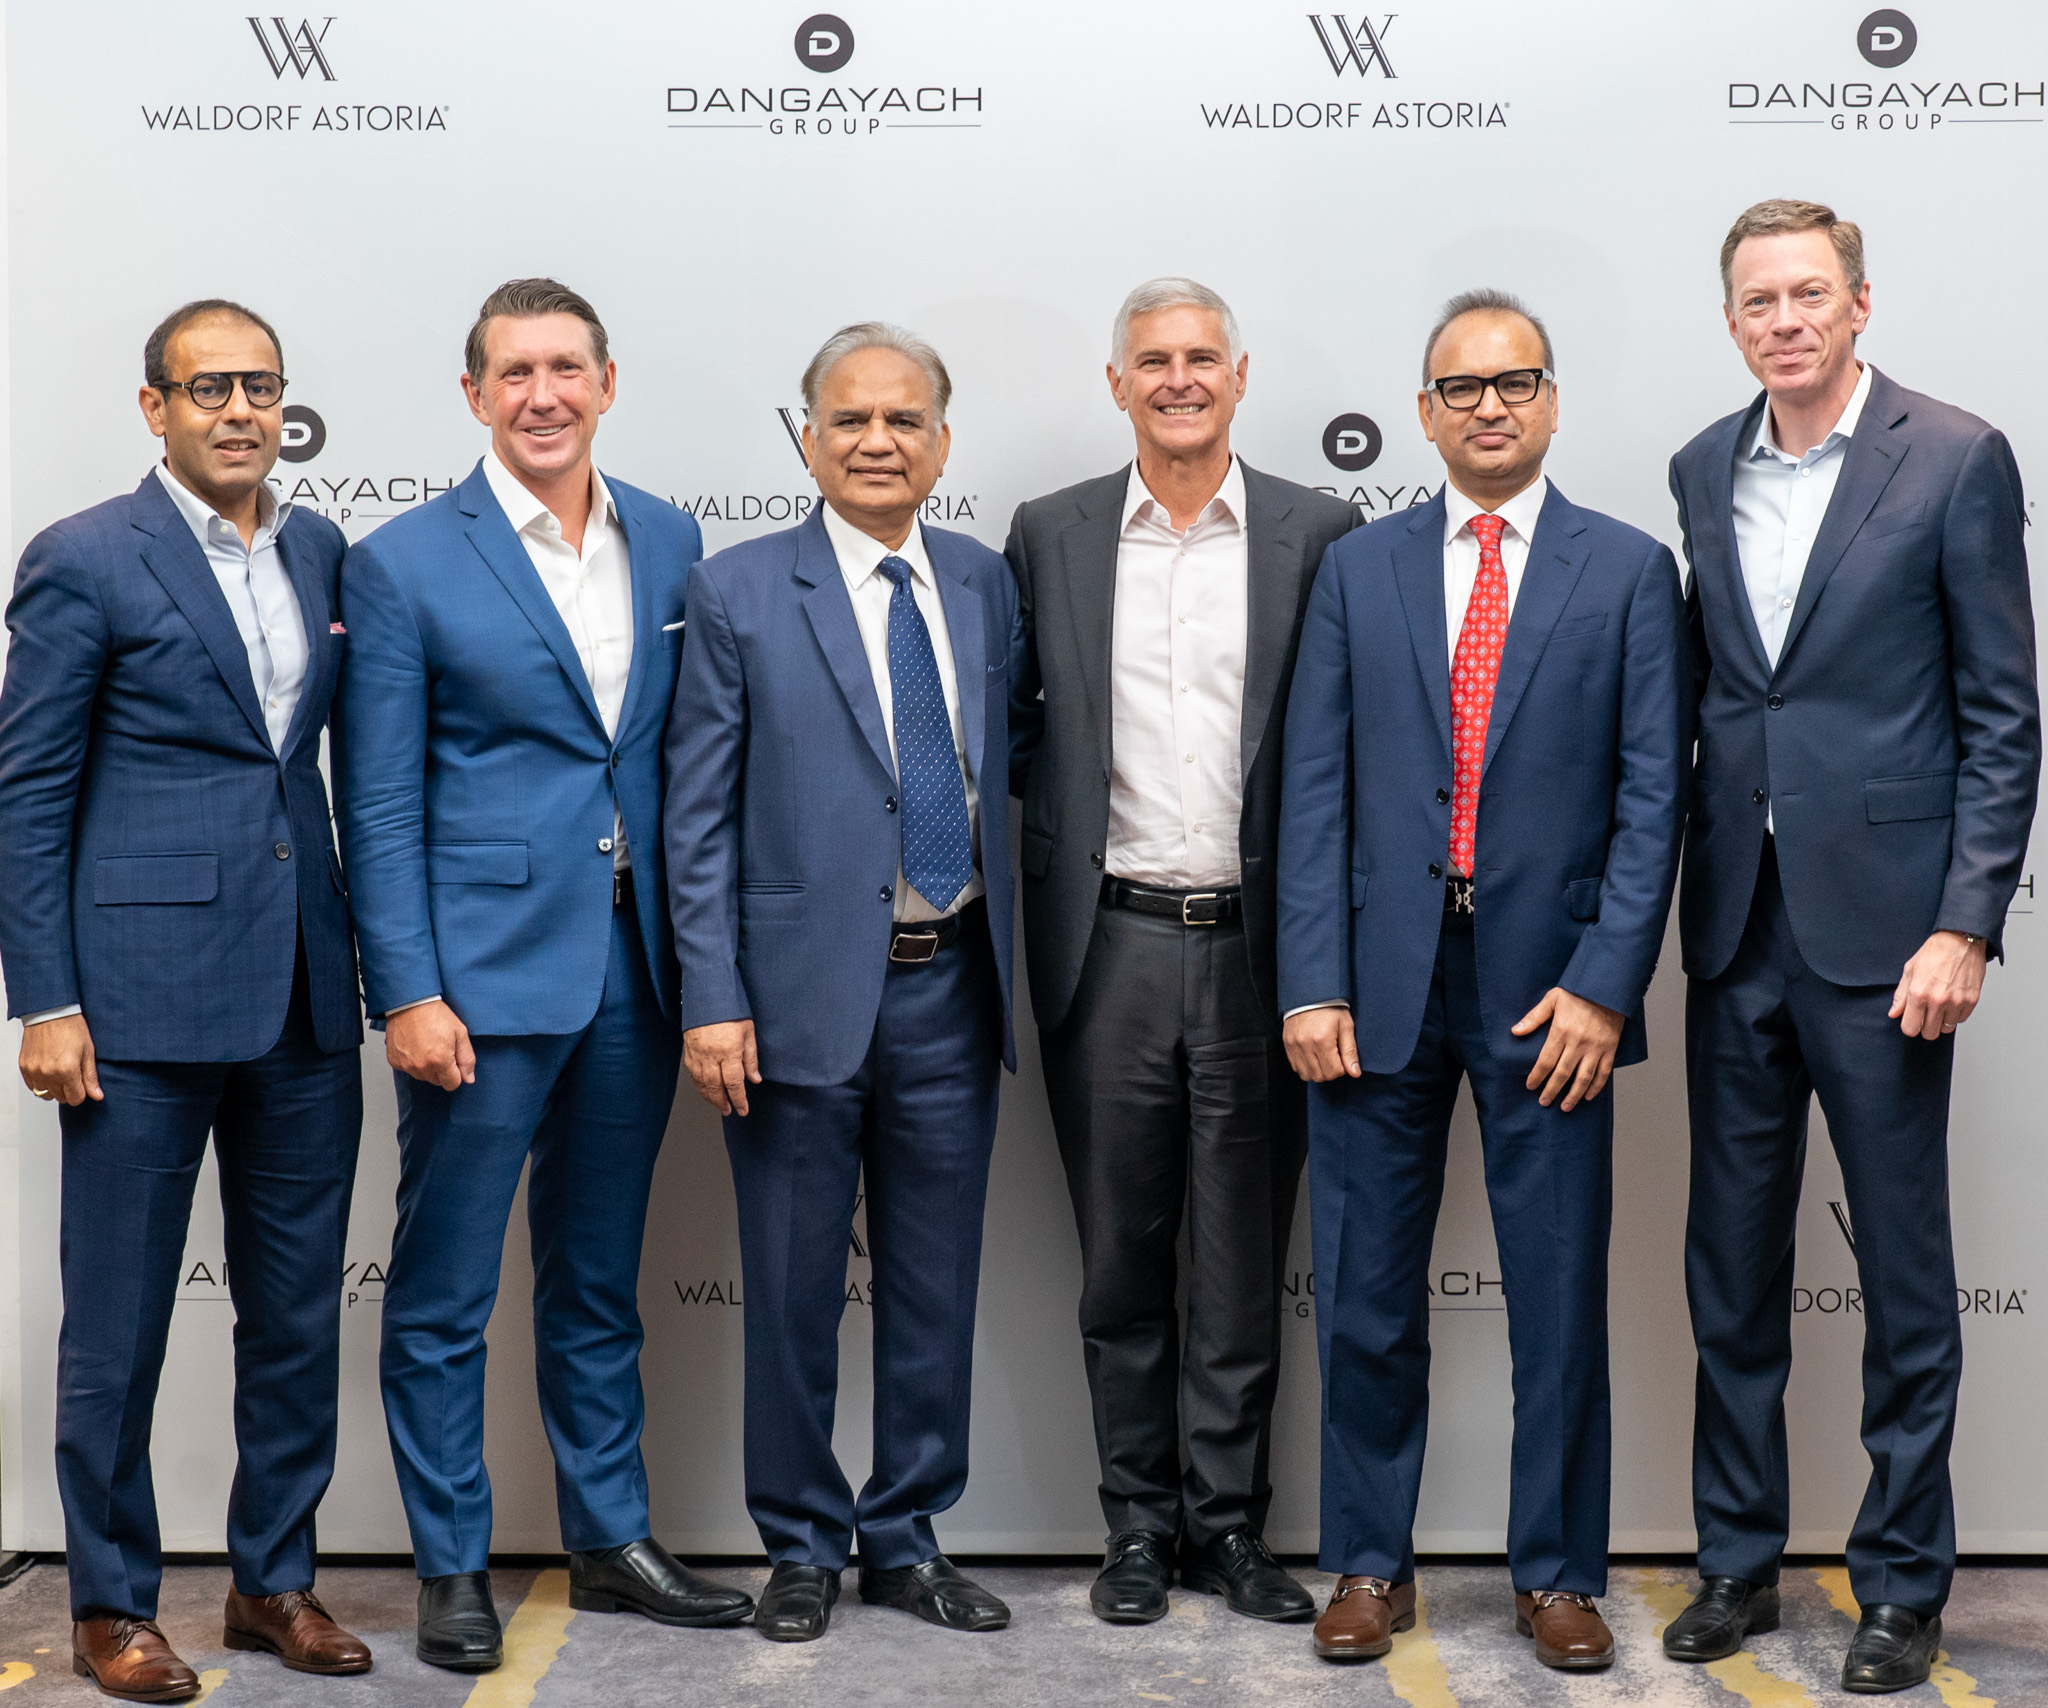 Hilton brings its global world-class luxury brand to Jaipur, announces debut of Waldorf Astoria Hotels & Resorts